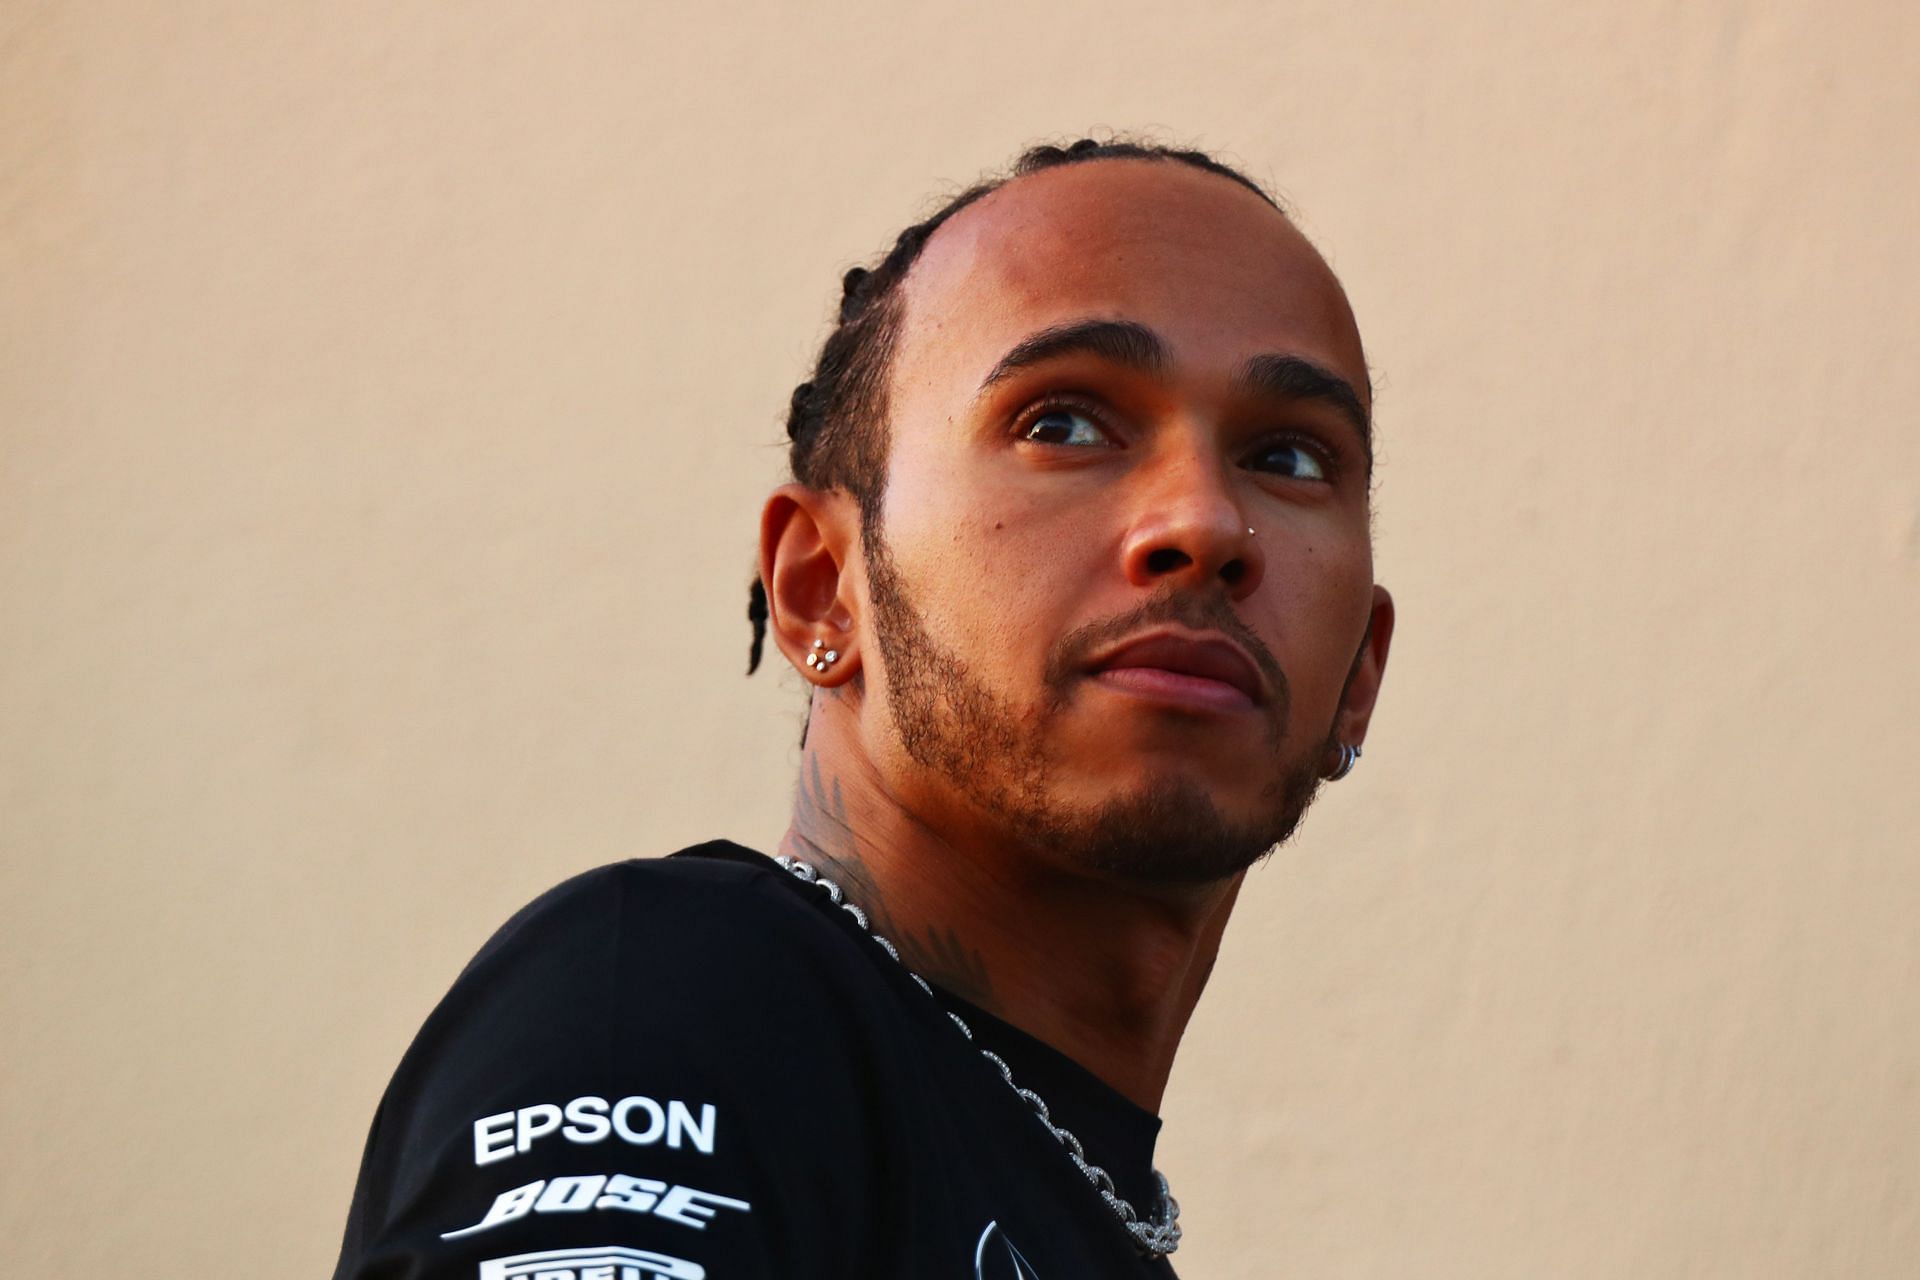 F1 Grand Prix of Abu Dhabi - Lewis Hamilton&#039;s future in the sport remains unclear